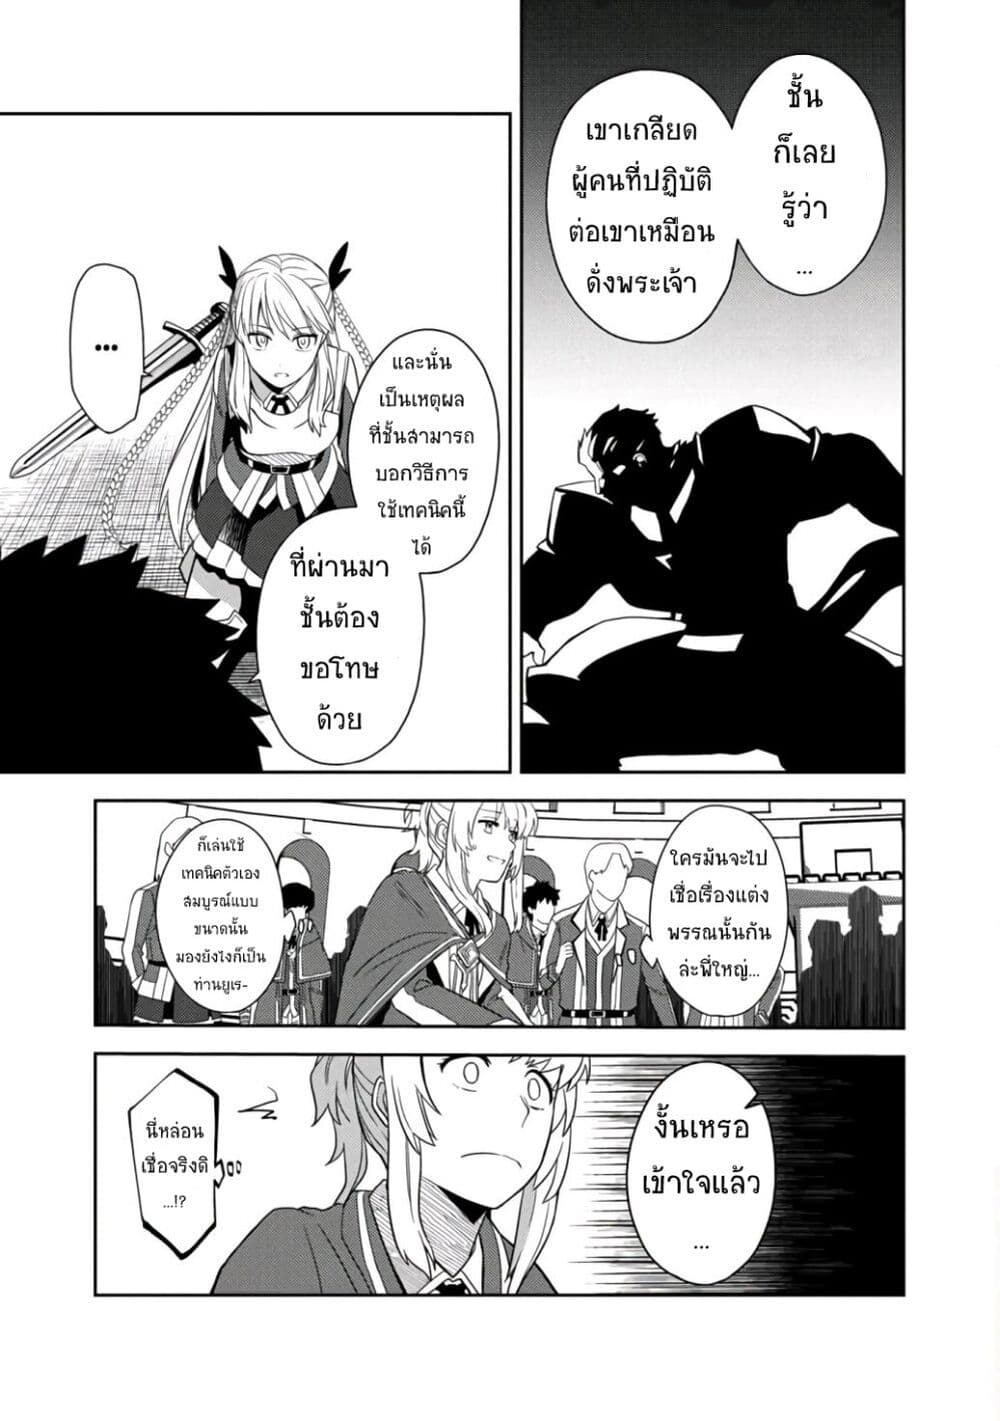 The Reincarnated Swordsman With 9999 Strength Wants to Become a Magician! ตอนที่ 3.2 (11)